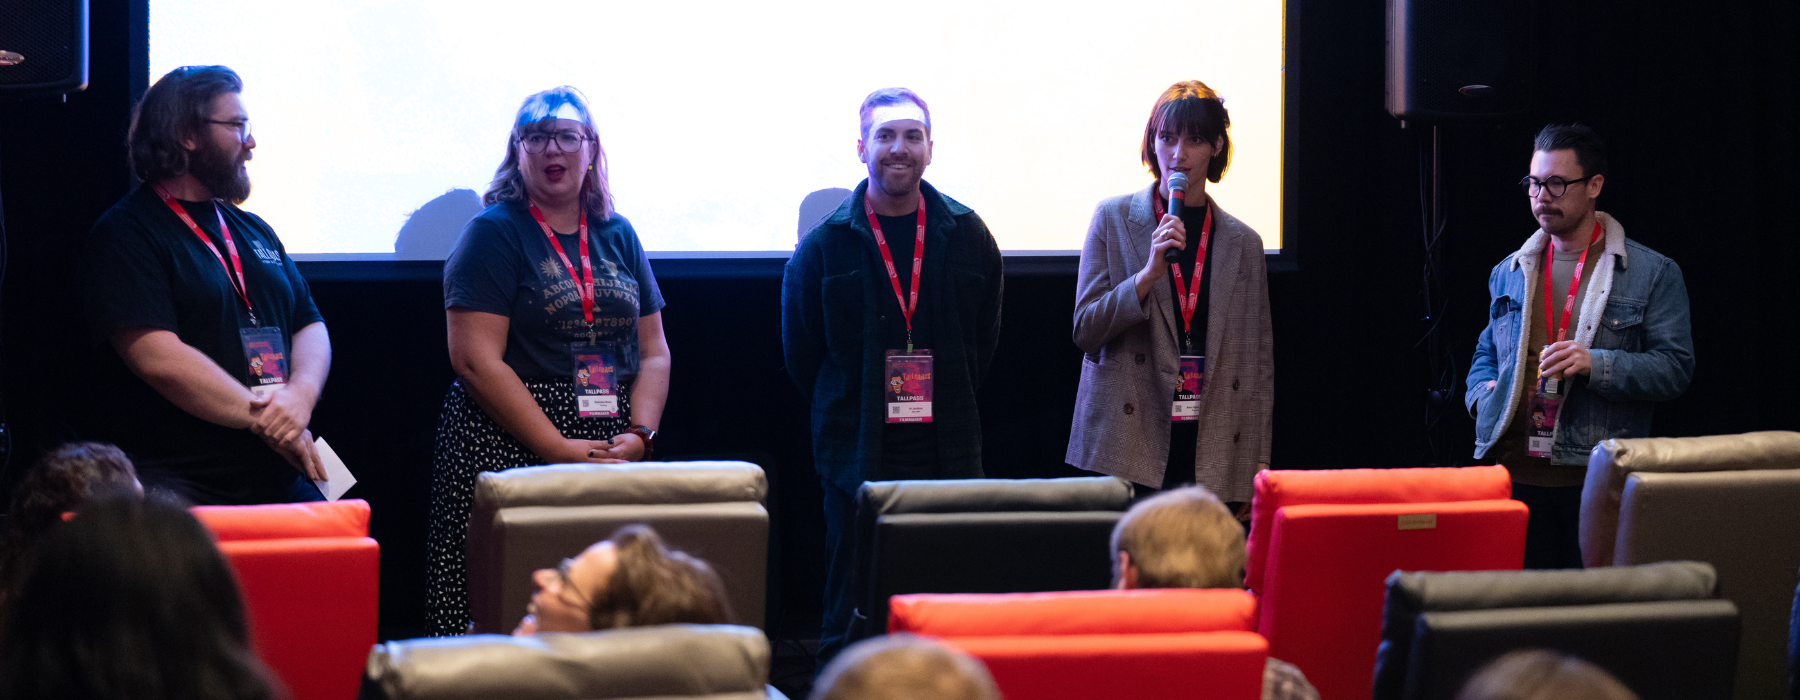 Five people stand in front of a screen facing an audience in red, gray and black chairs